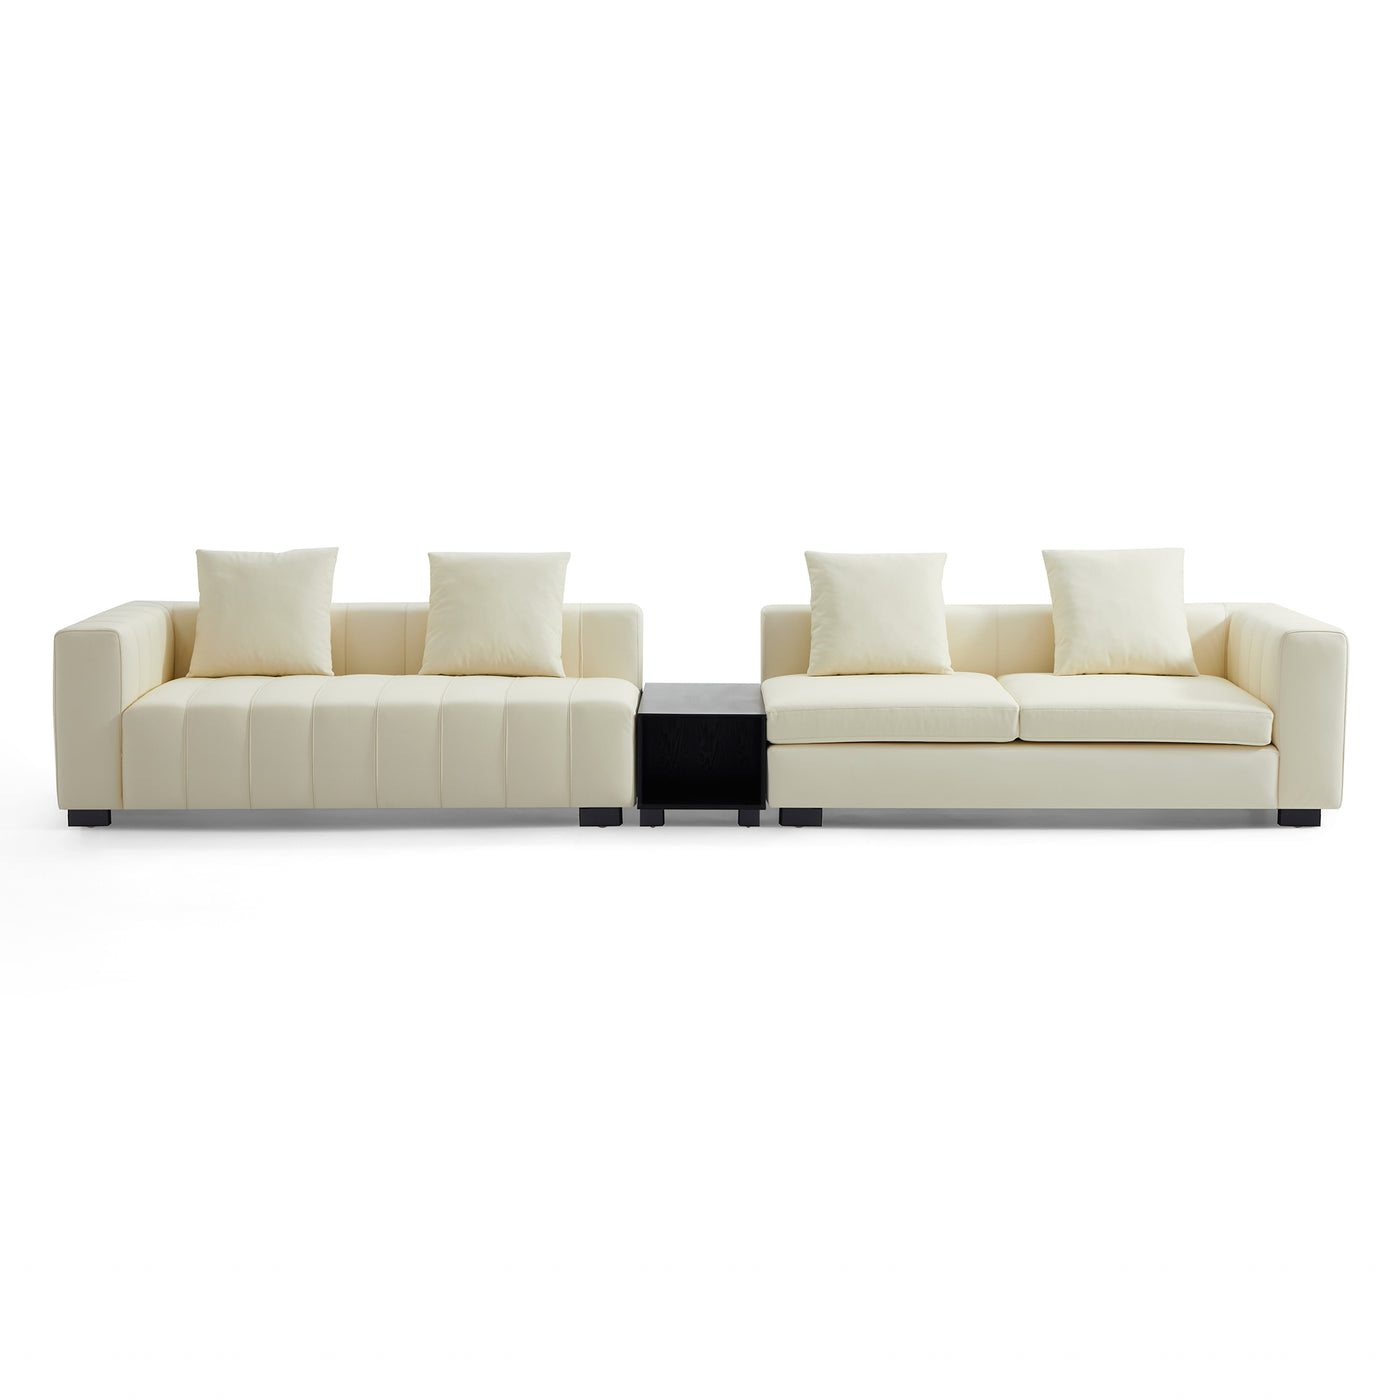 Piano Beige Leather Sofa with Coffee Table-Beige